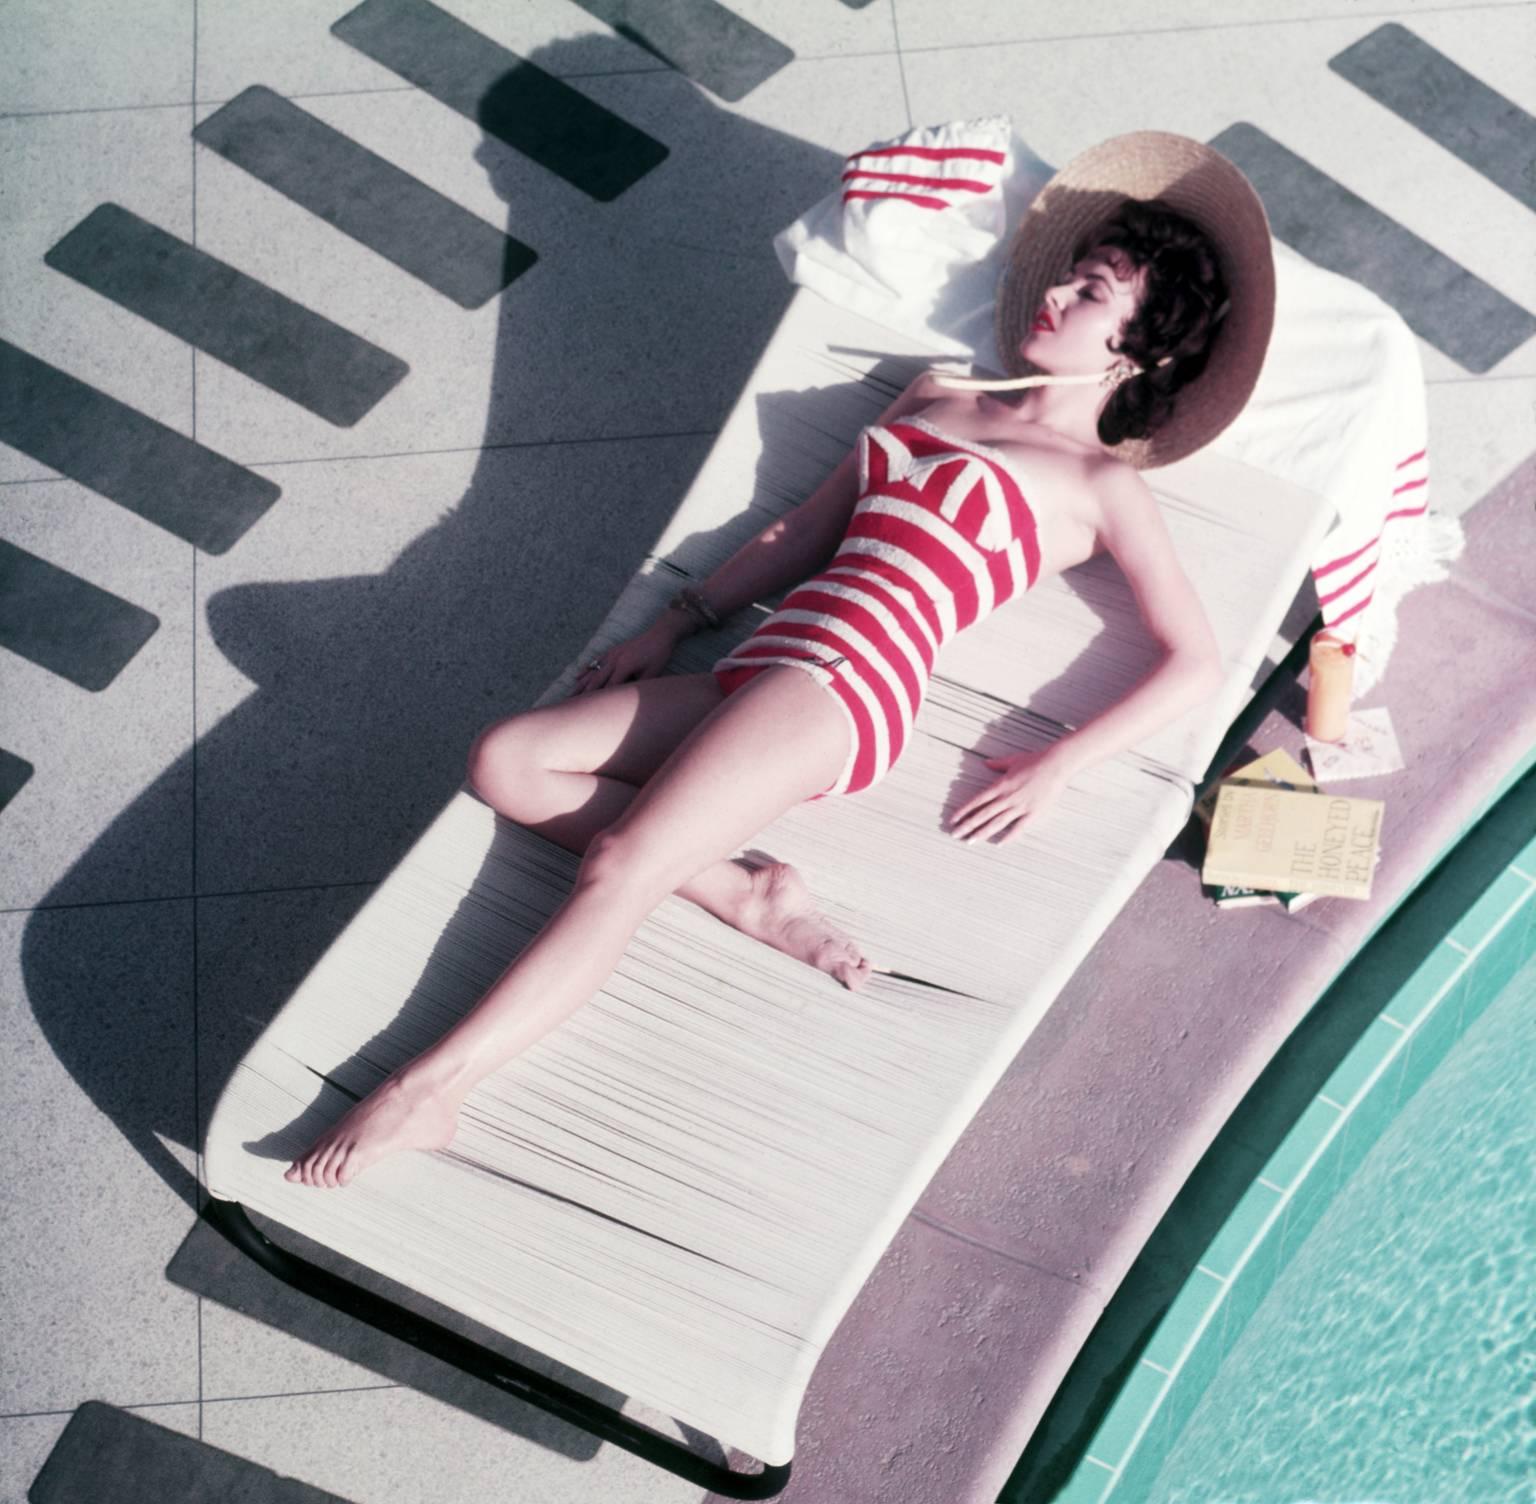 Glamorous, Austrian actress Mara Lane lounging and sunbathing by the pool in a striking red and white striped bathing costume at the Sands Hotel, Las Vegas, 1954. (Photo by Slim Aarons)

Typically 'Slim Poolside' this photograph epitomises the